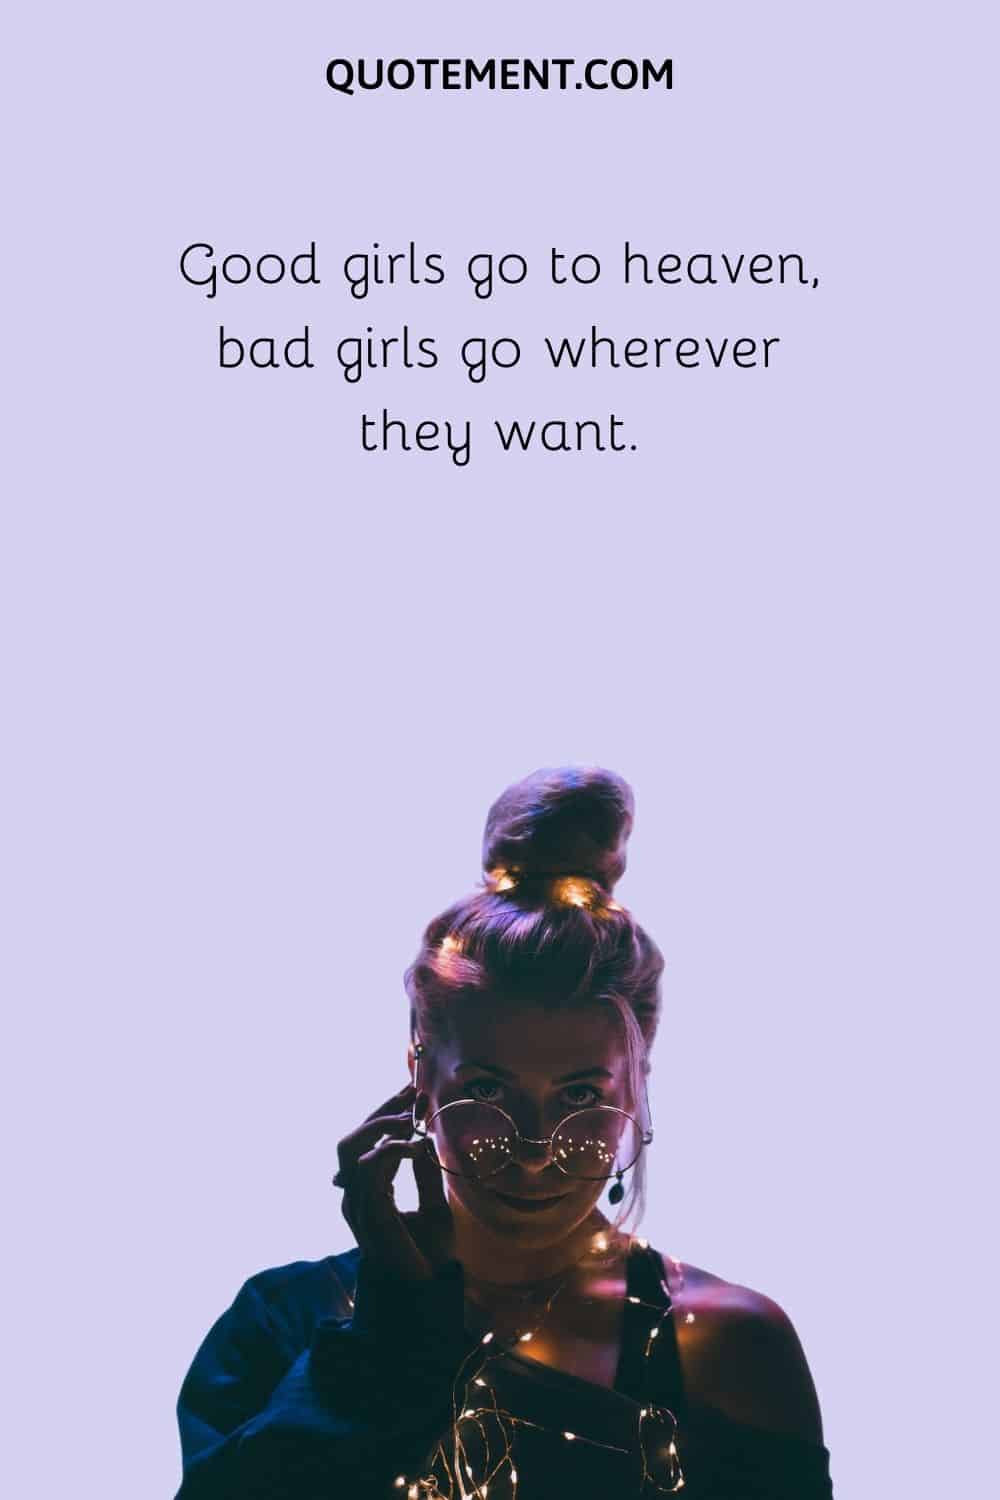 Good girls go to heaven, bad girls go wherever they want